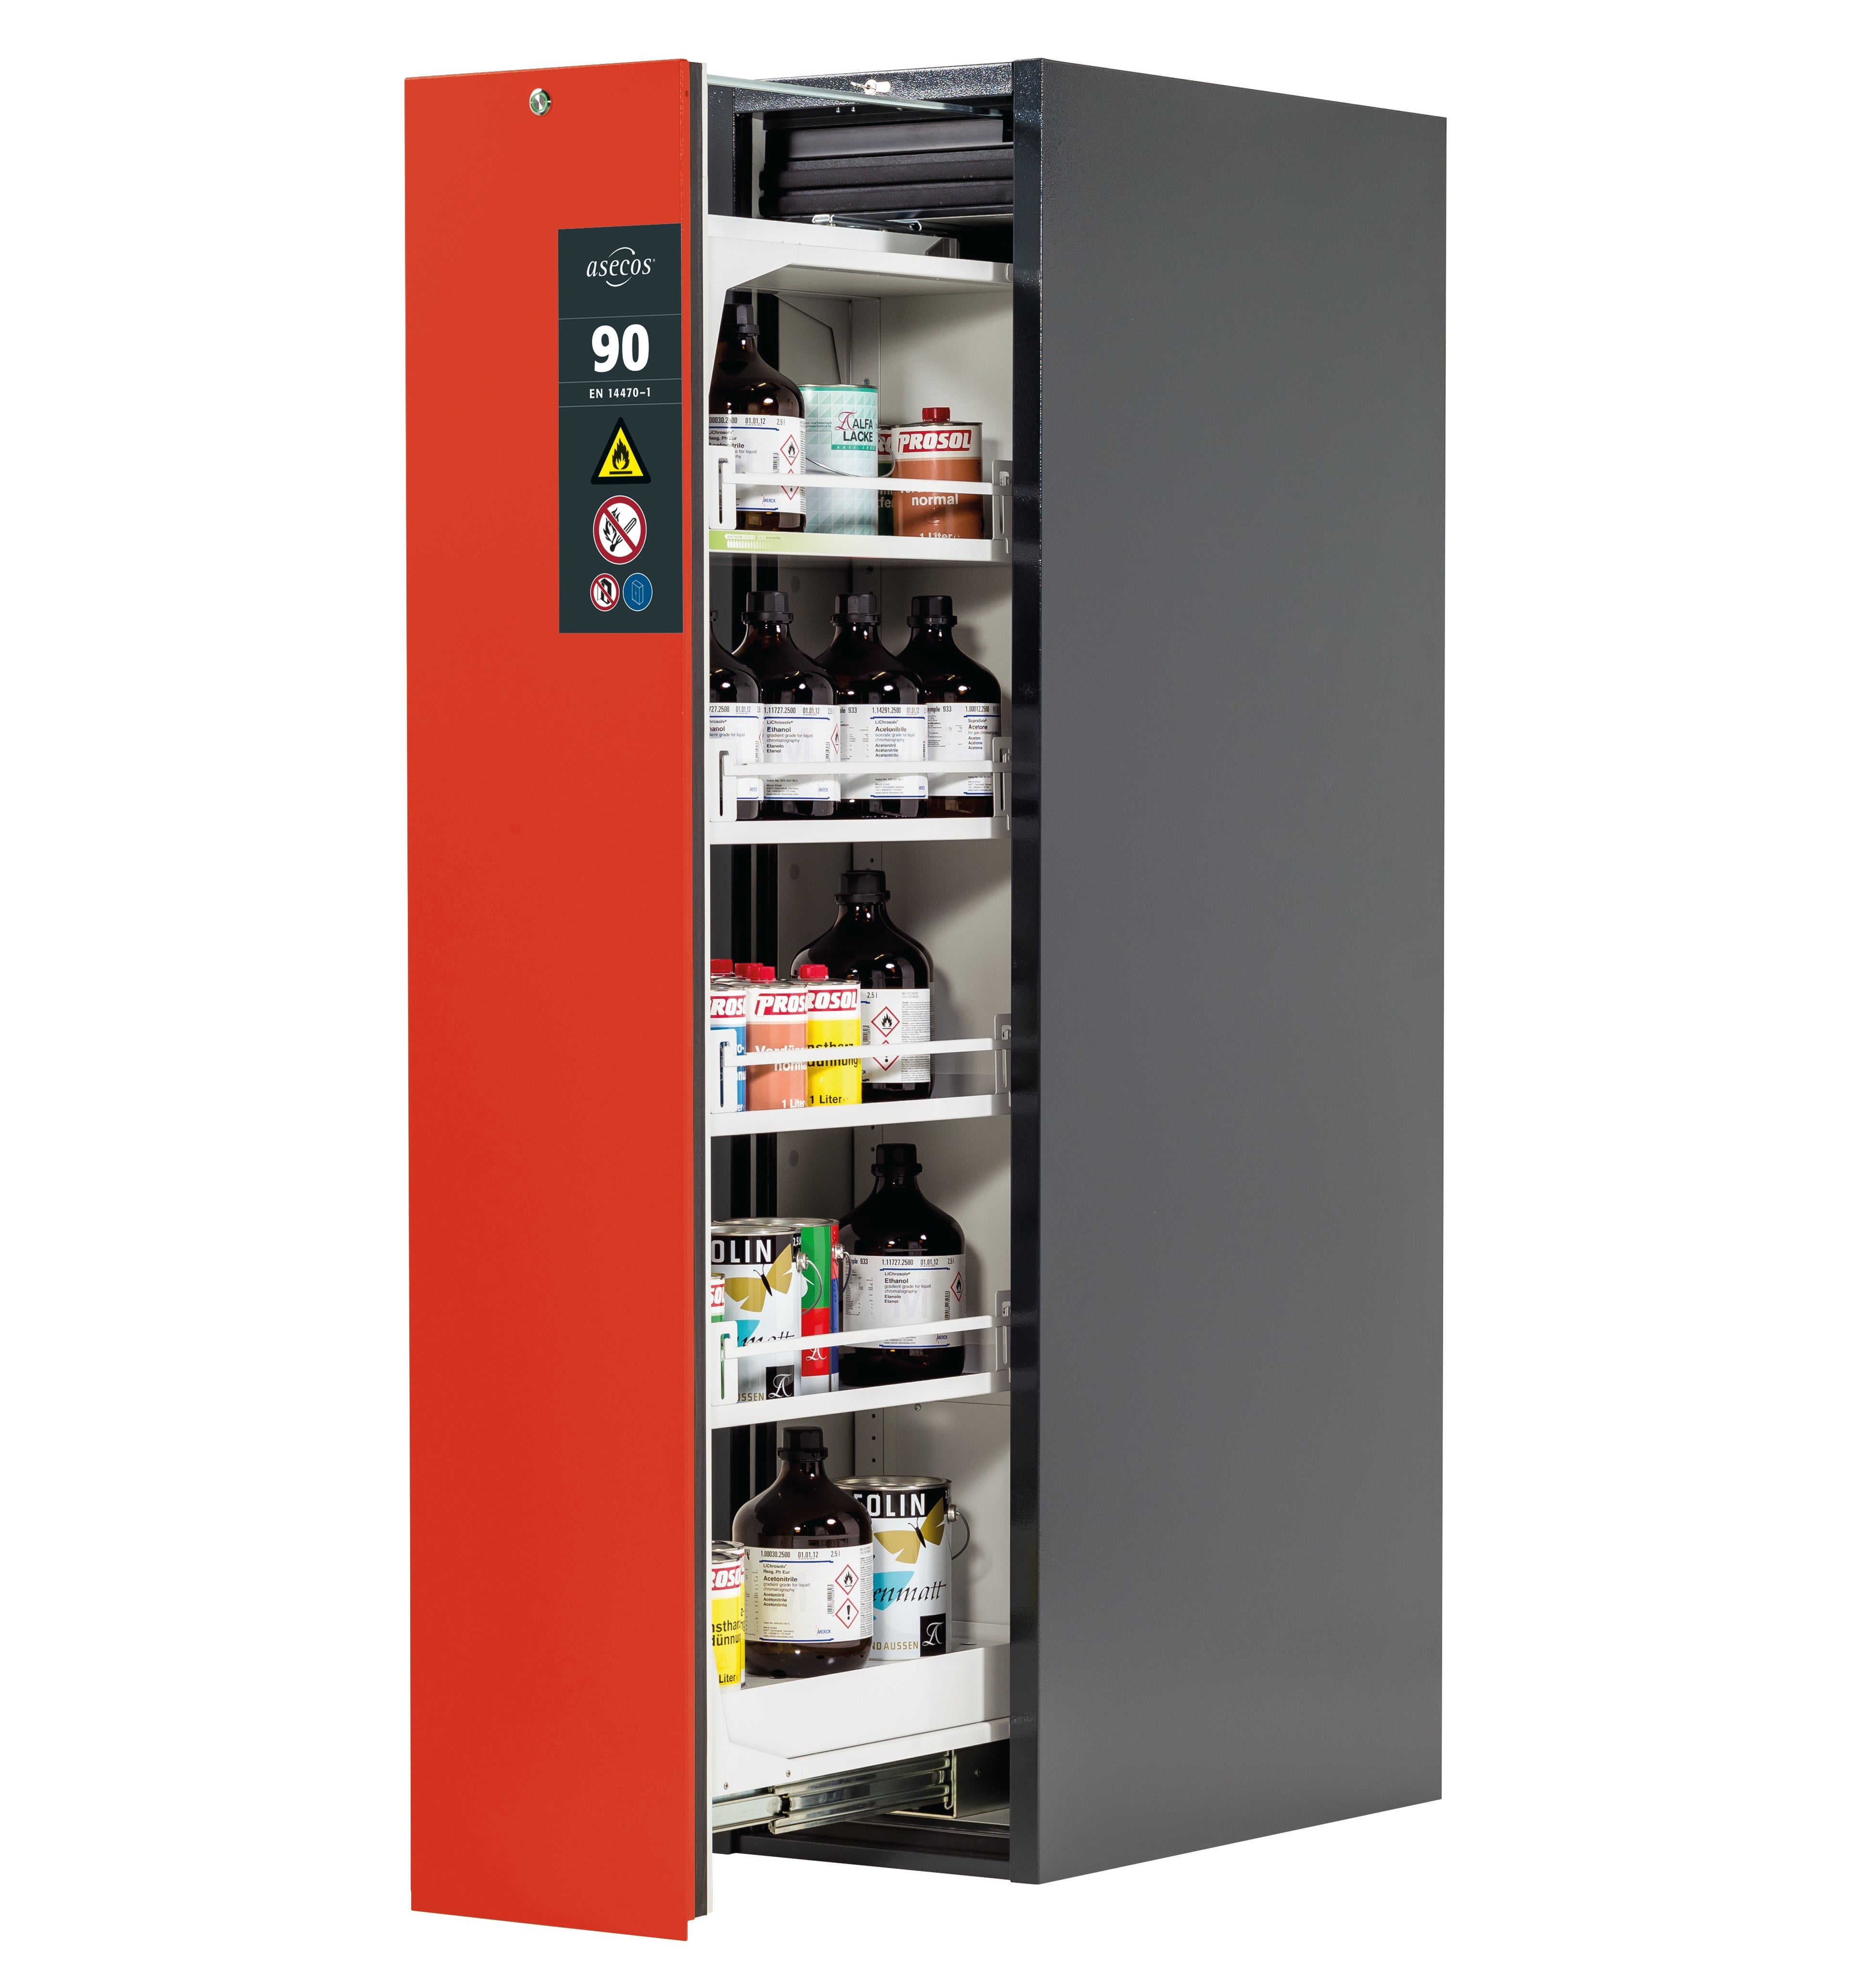 Type 90 safety cabinet V-MOVE-90 model V90.196.045.VDAC:0013 in traffic red RAL 3020 with 4x standard shelves (sheet steel)